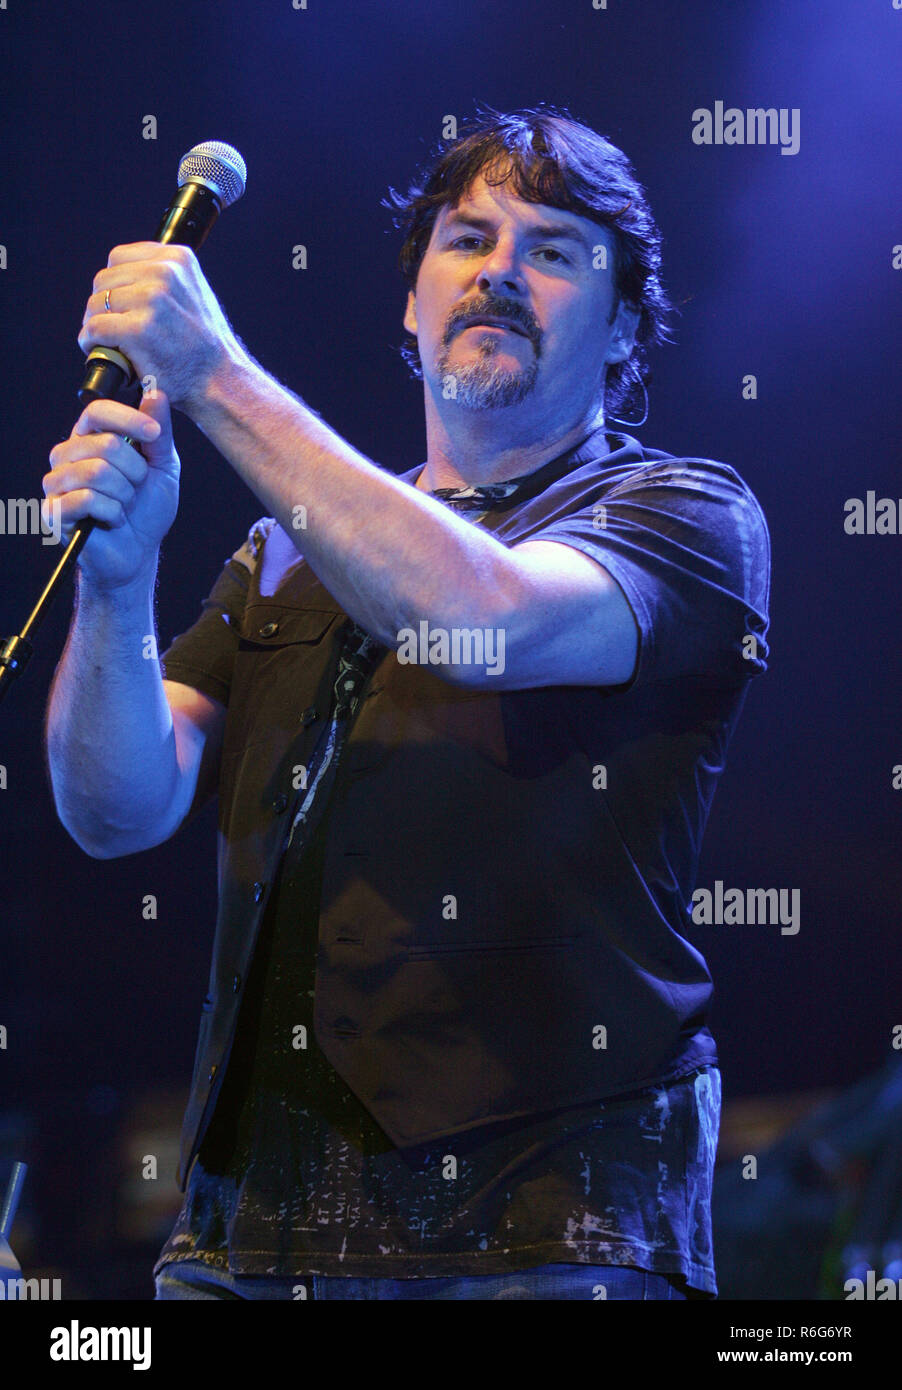 Tommy DeCarlo with Boston performs in concert at the Seminole Hard Rock  Hotel and Casino in Hollywood, Florida on August 21, 2008 Stock Photo -  Alamy